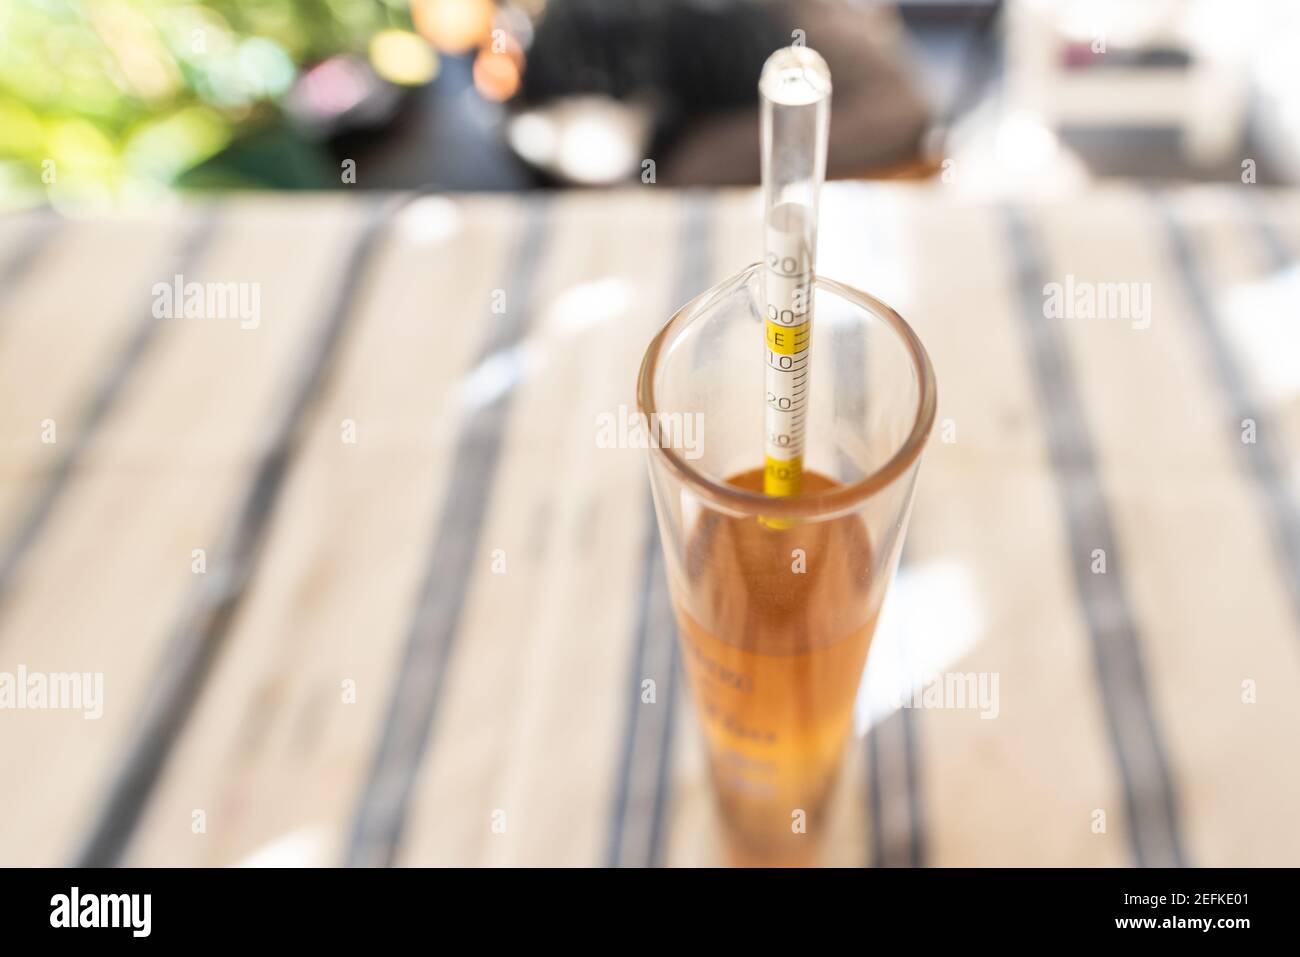 Measurement of alcohol content in beer. One of the most essential equipments in home brewing, hydrometer in a glass of beer. Stock Photo